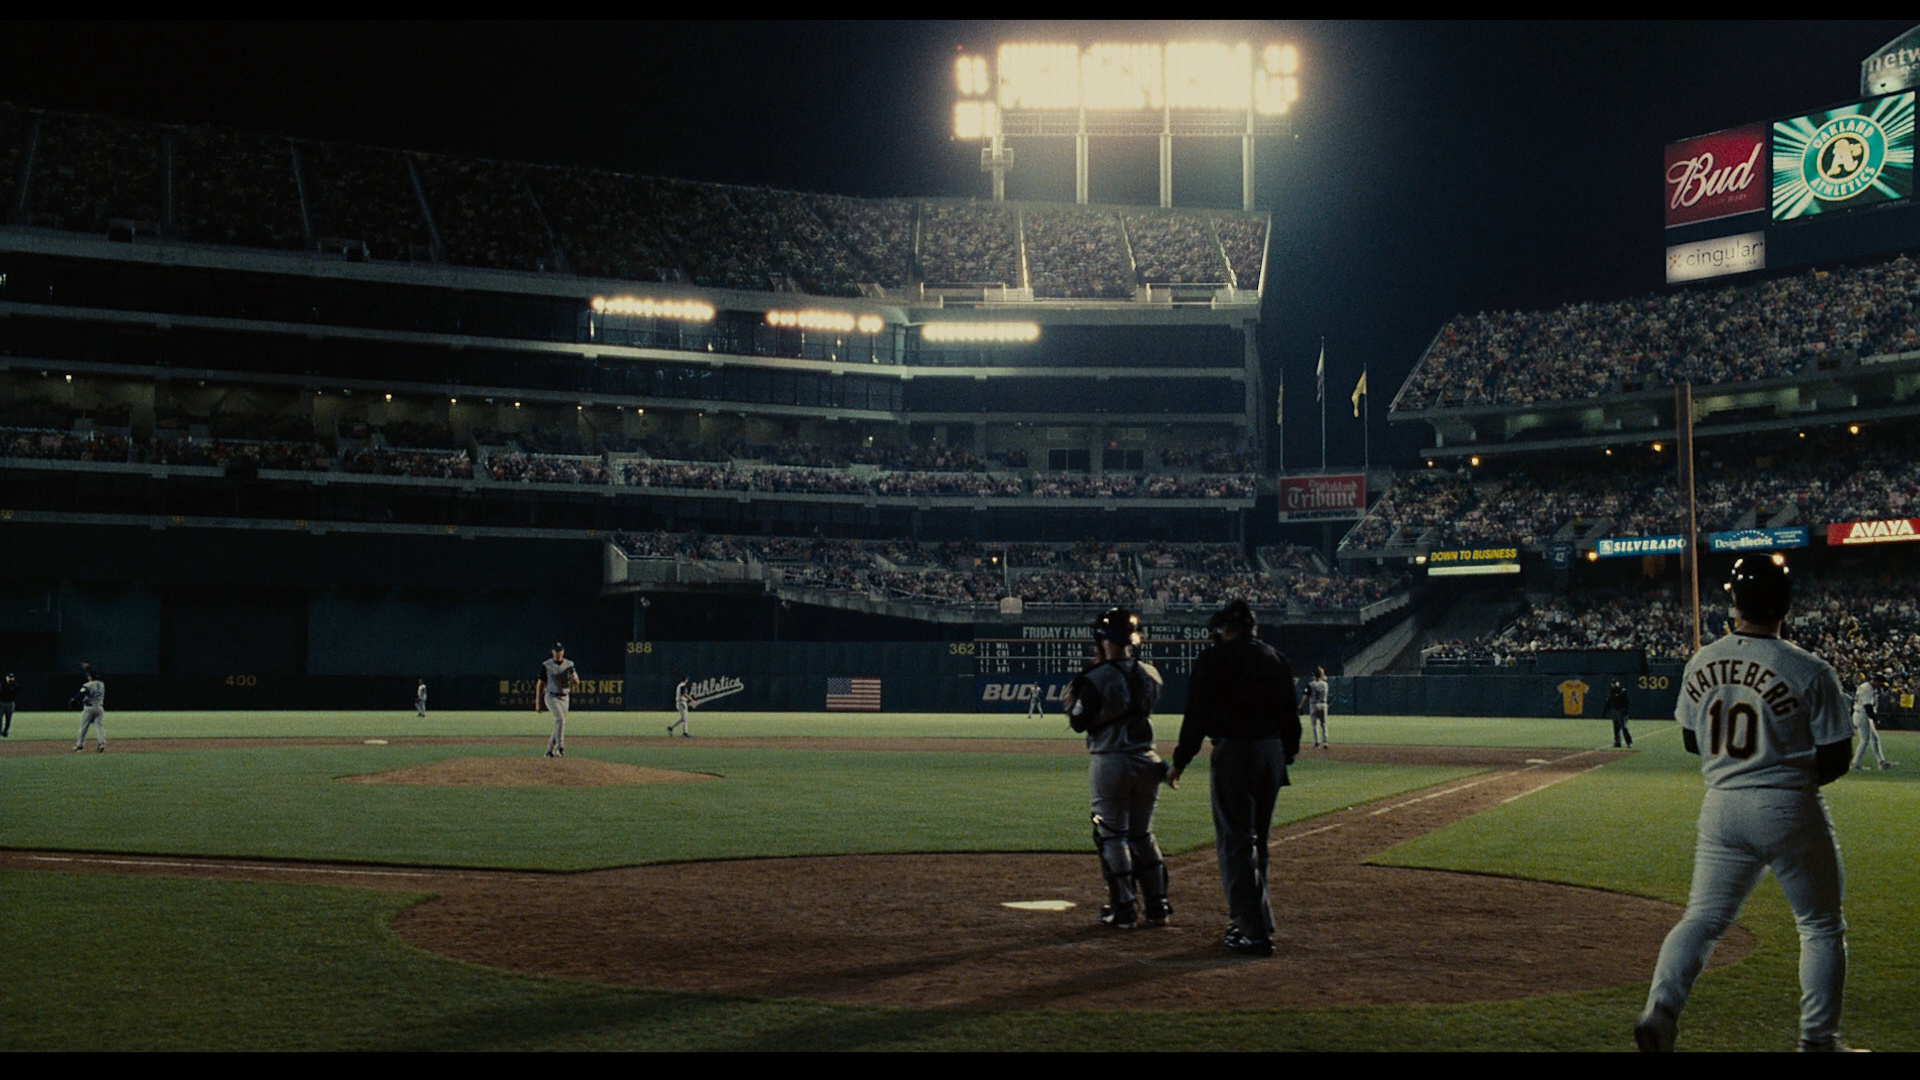 Moneyball: The film was nominated for six Academy Awards at the 84th Academy Awards ceremony. 1920x1080 Full HD Wallpaper.